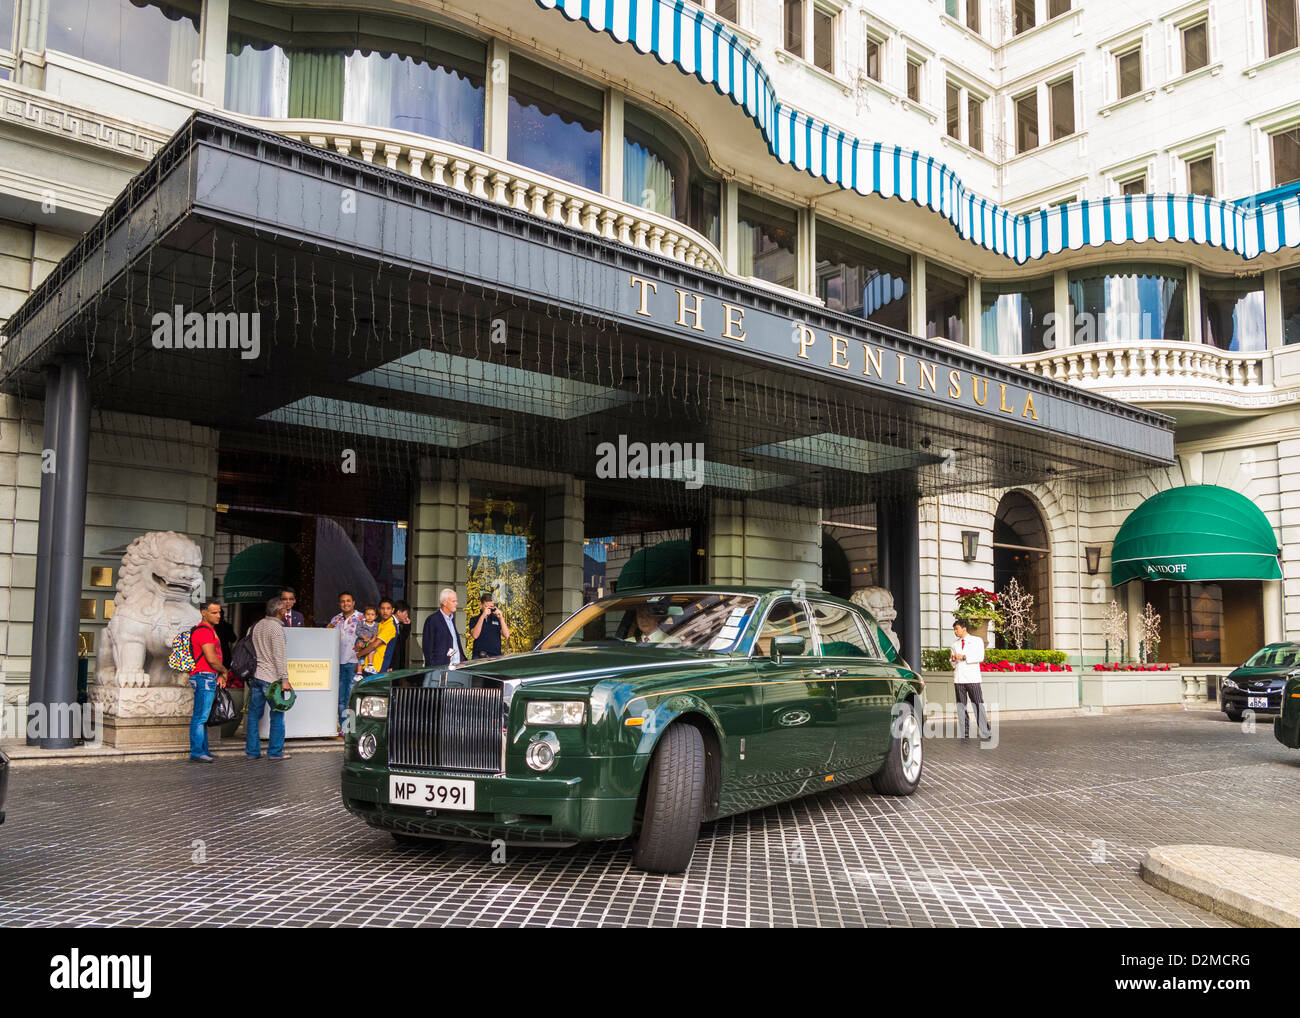 Peninsula Hotel, Kowloon, Hong Kong - One of the fleet of Rolls Royce cars used by the hotel Stock Photo